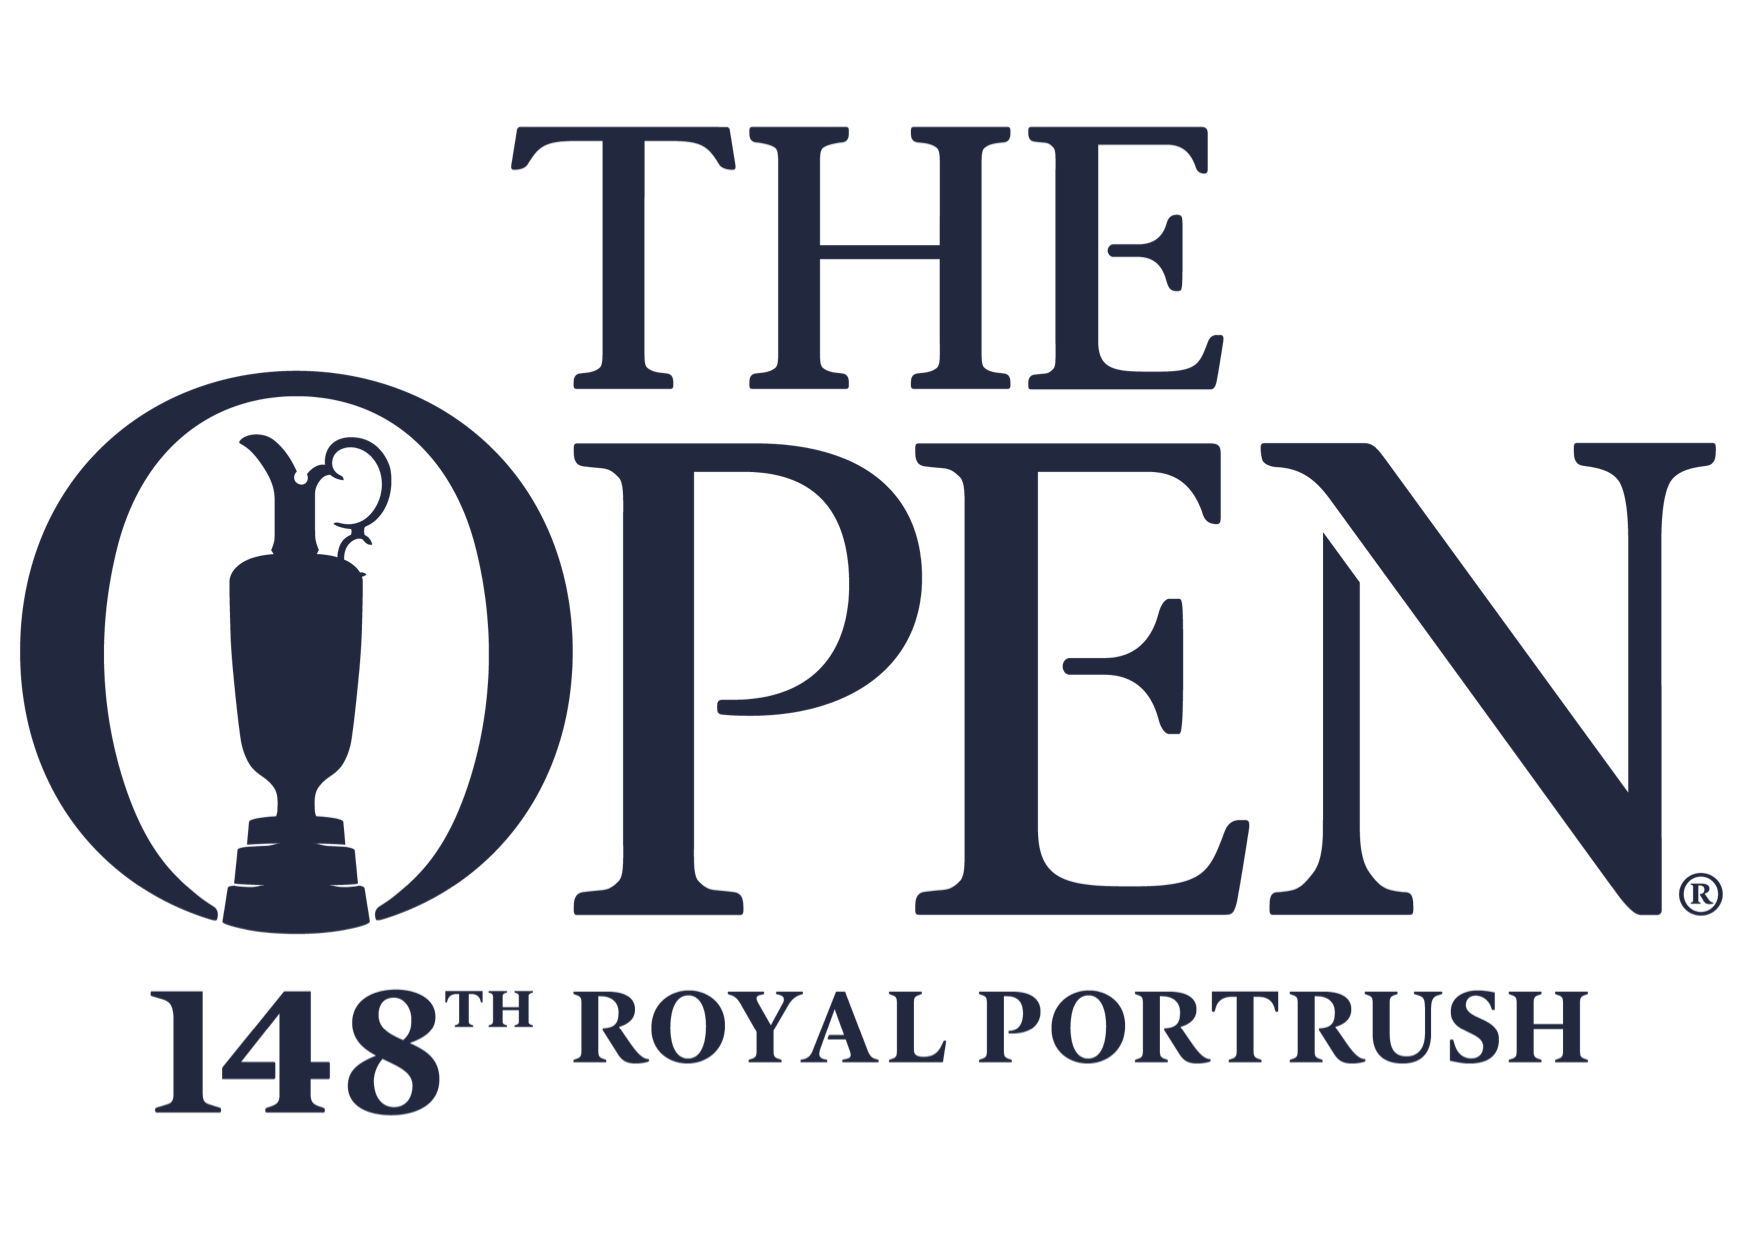 What a week for Northern Ireland and Golf with The 2019 Open Championship